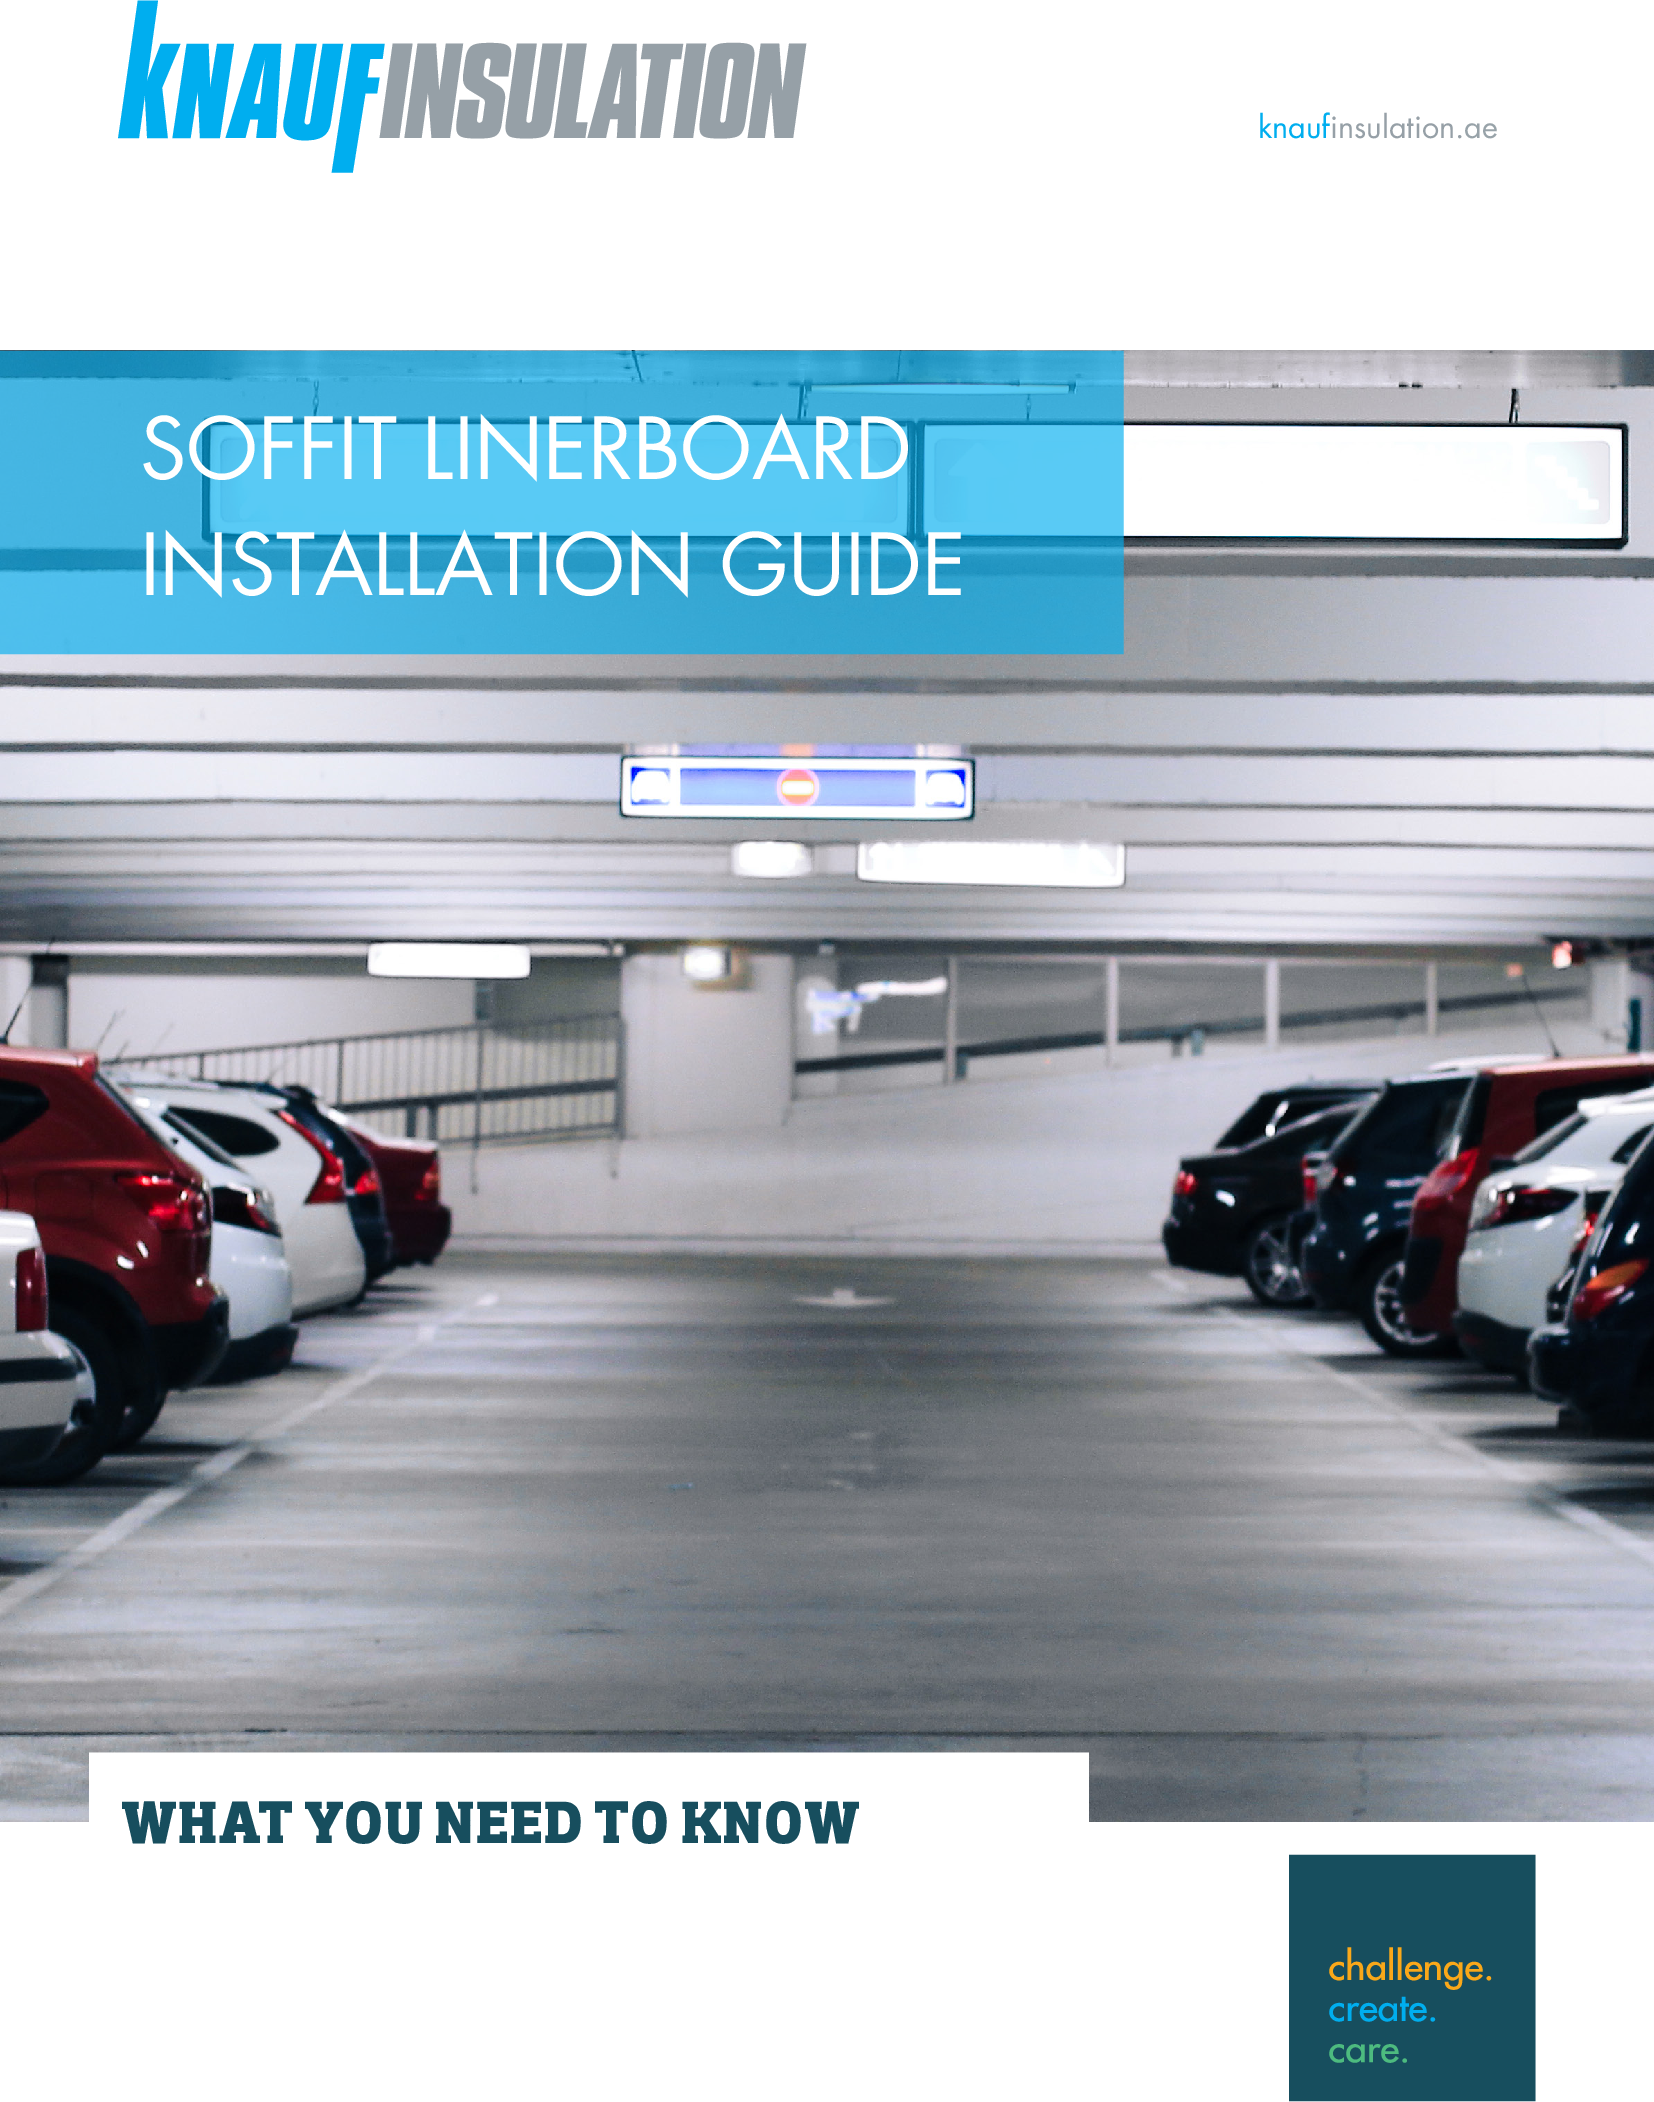 Soffit Linerboard Installation Guide